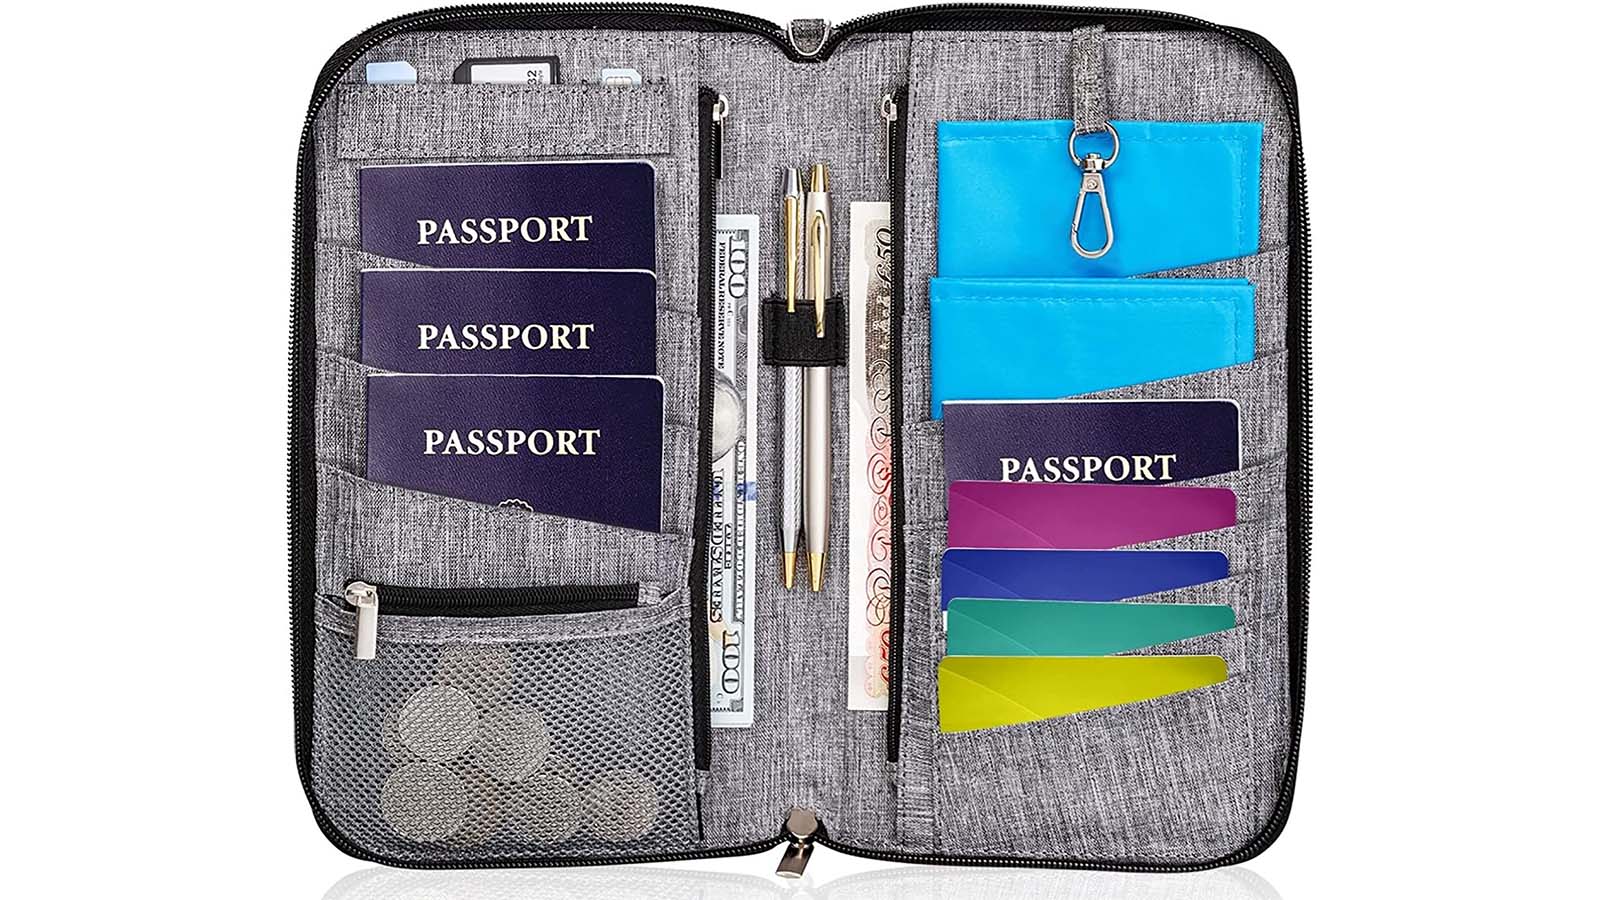 Are any of these deal breakers to you? #louisvuitton #passportcovers, Passport